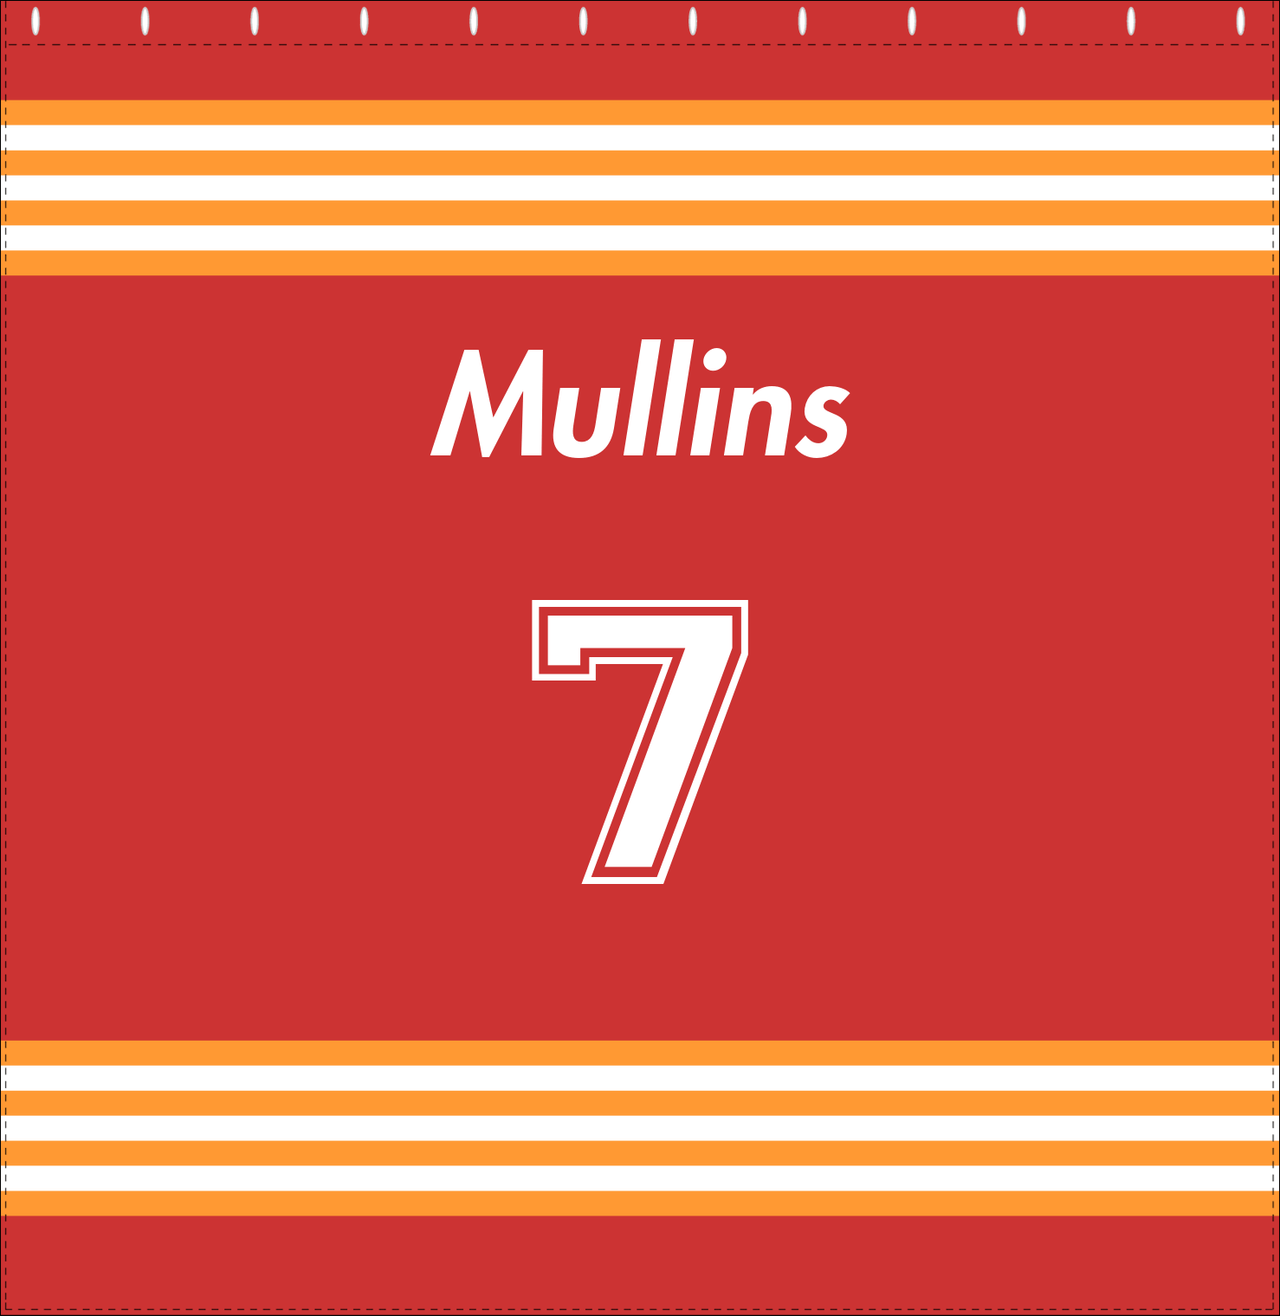 Personalized Jersey Number Shower Curtain - Red & Orange - Triple Stripe - Decorate View